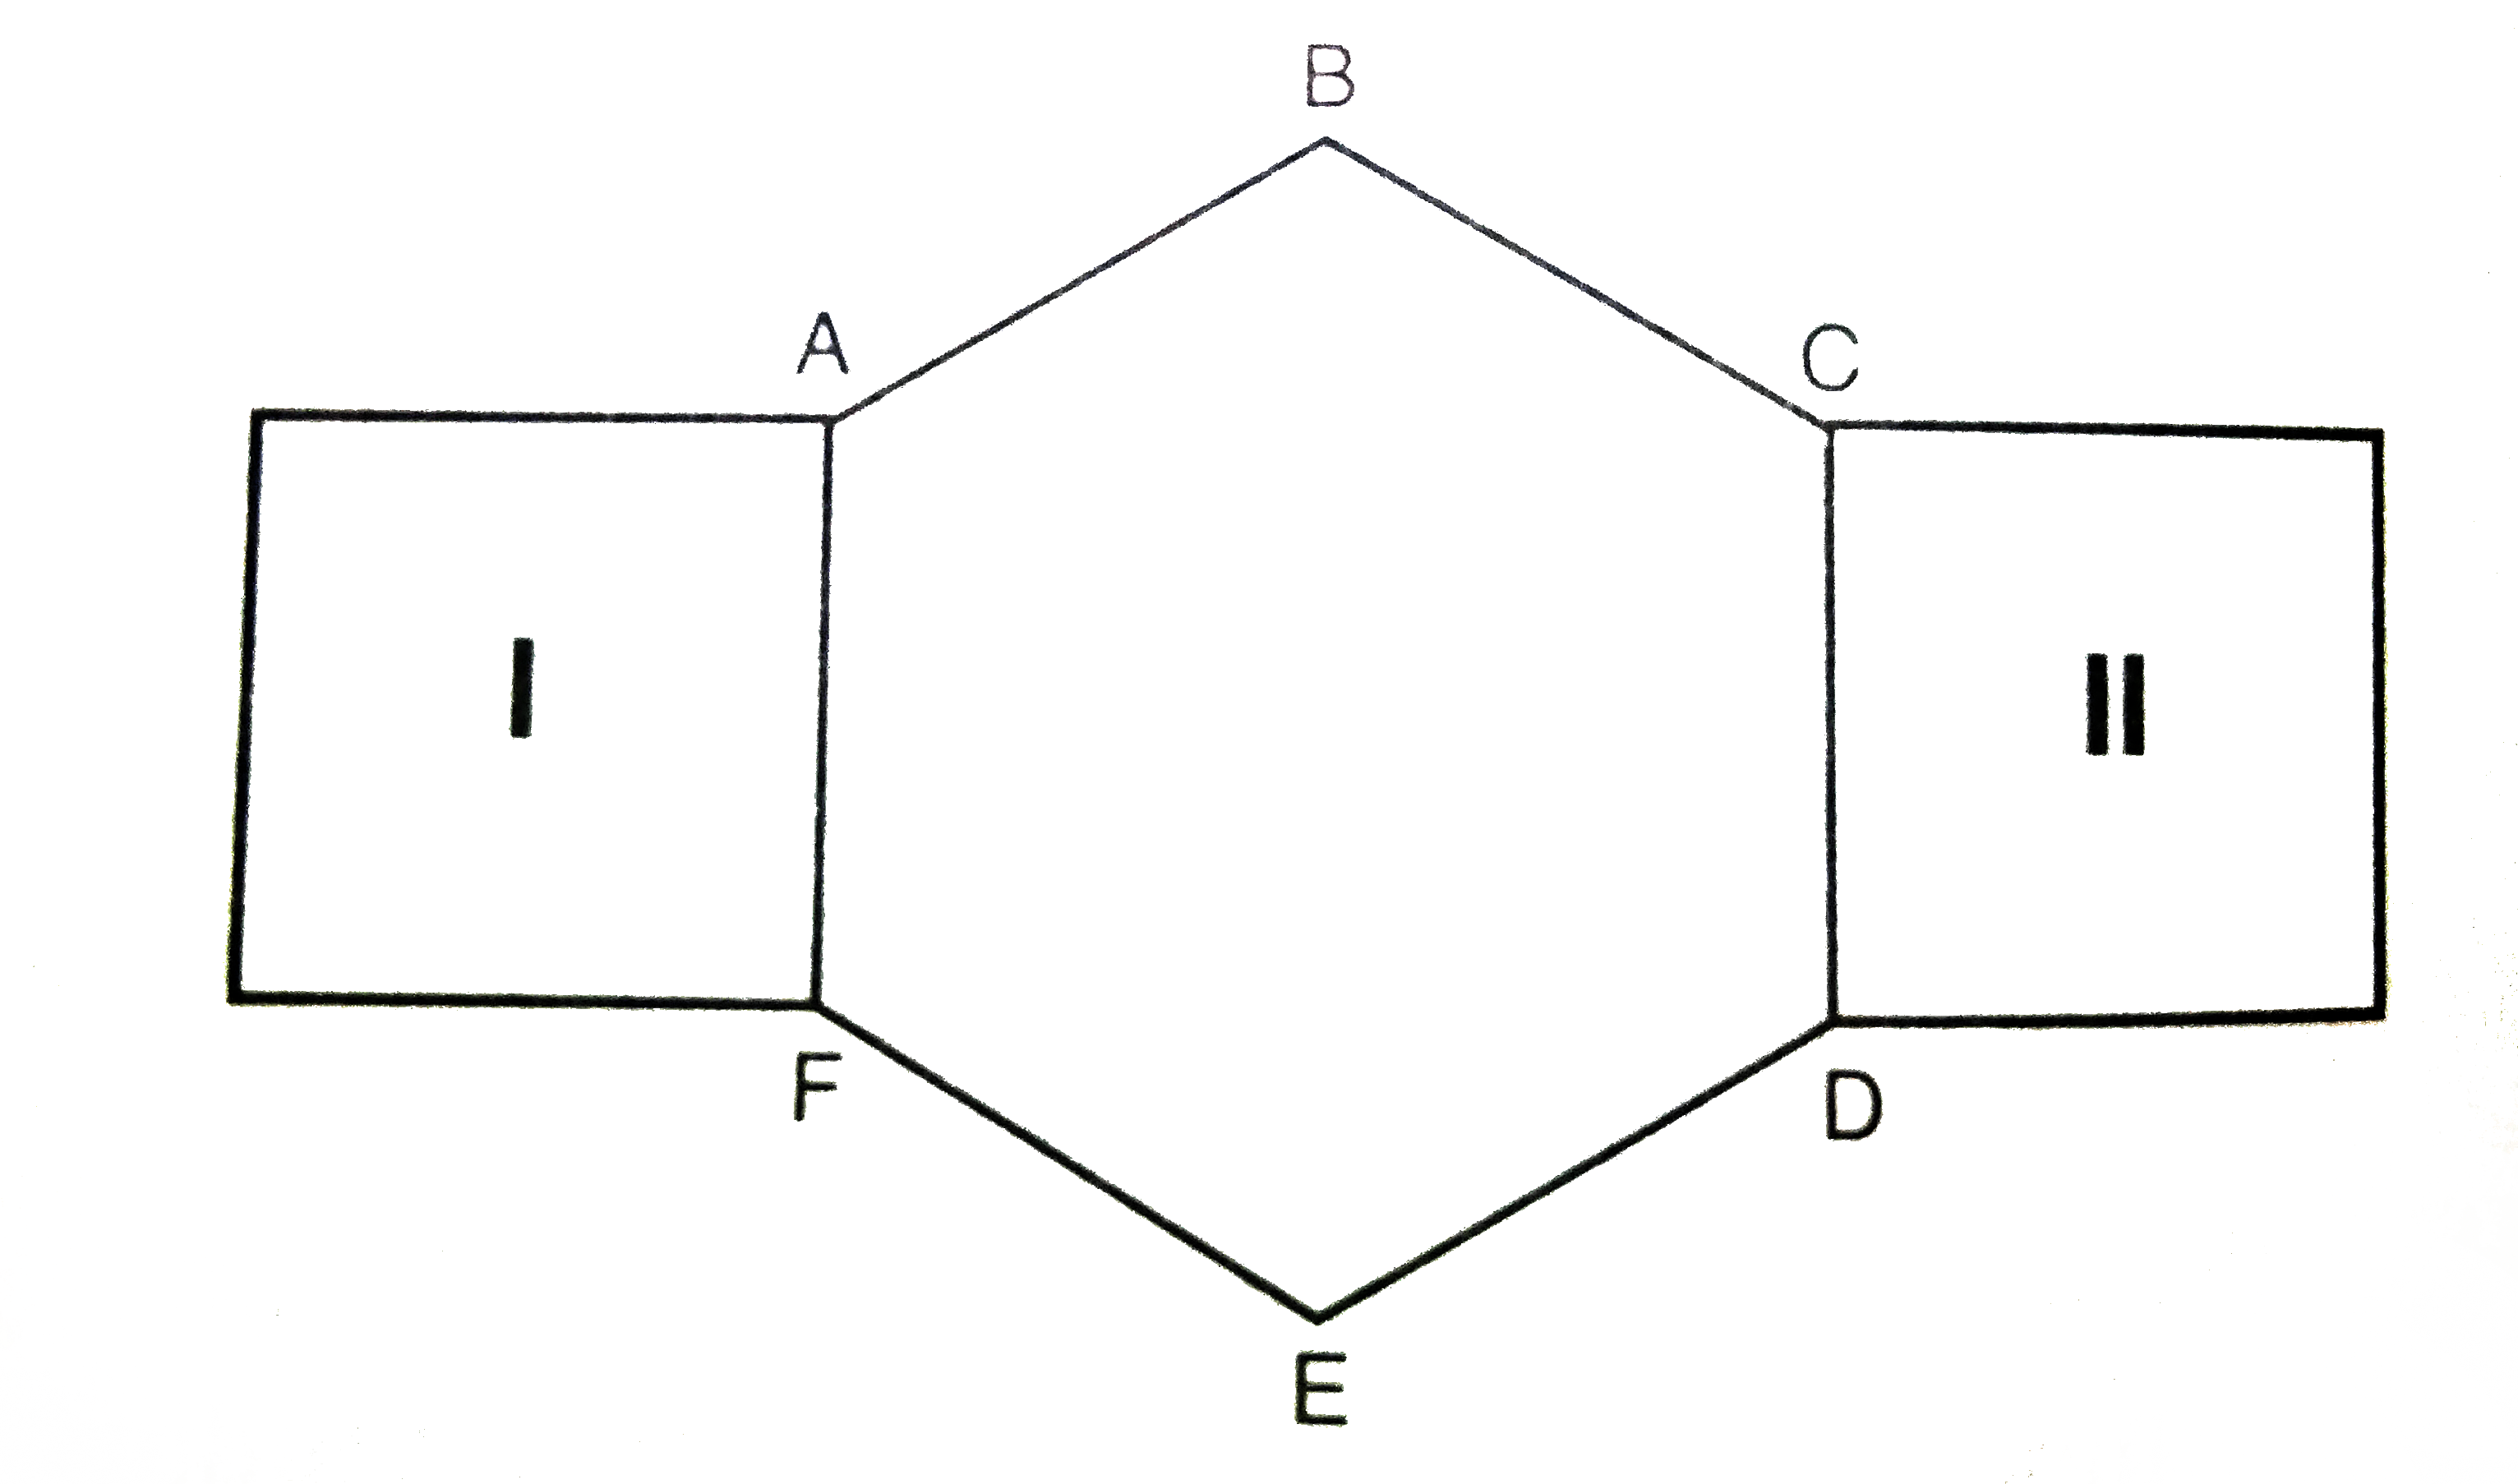 A metal belt buckle is being designed so that it has the shape of a regular hexagon inn the center and squares at opposite ends as shown in the figure above where ABCDEF is a regular hexagon and figures I and II are squares. The hexagon will be gold plated and the two squares silver plated. The length of a side of each square is 6 centimeters. Which of the following is closest to the percent of the total surface area of the buckle that will be silver plated?